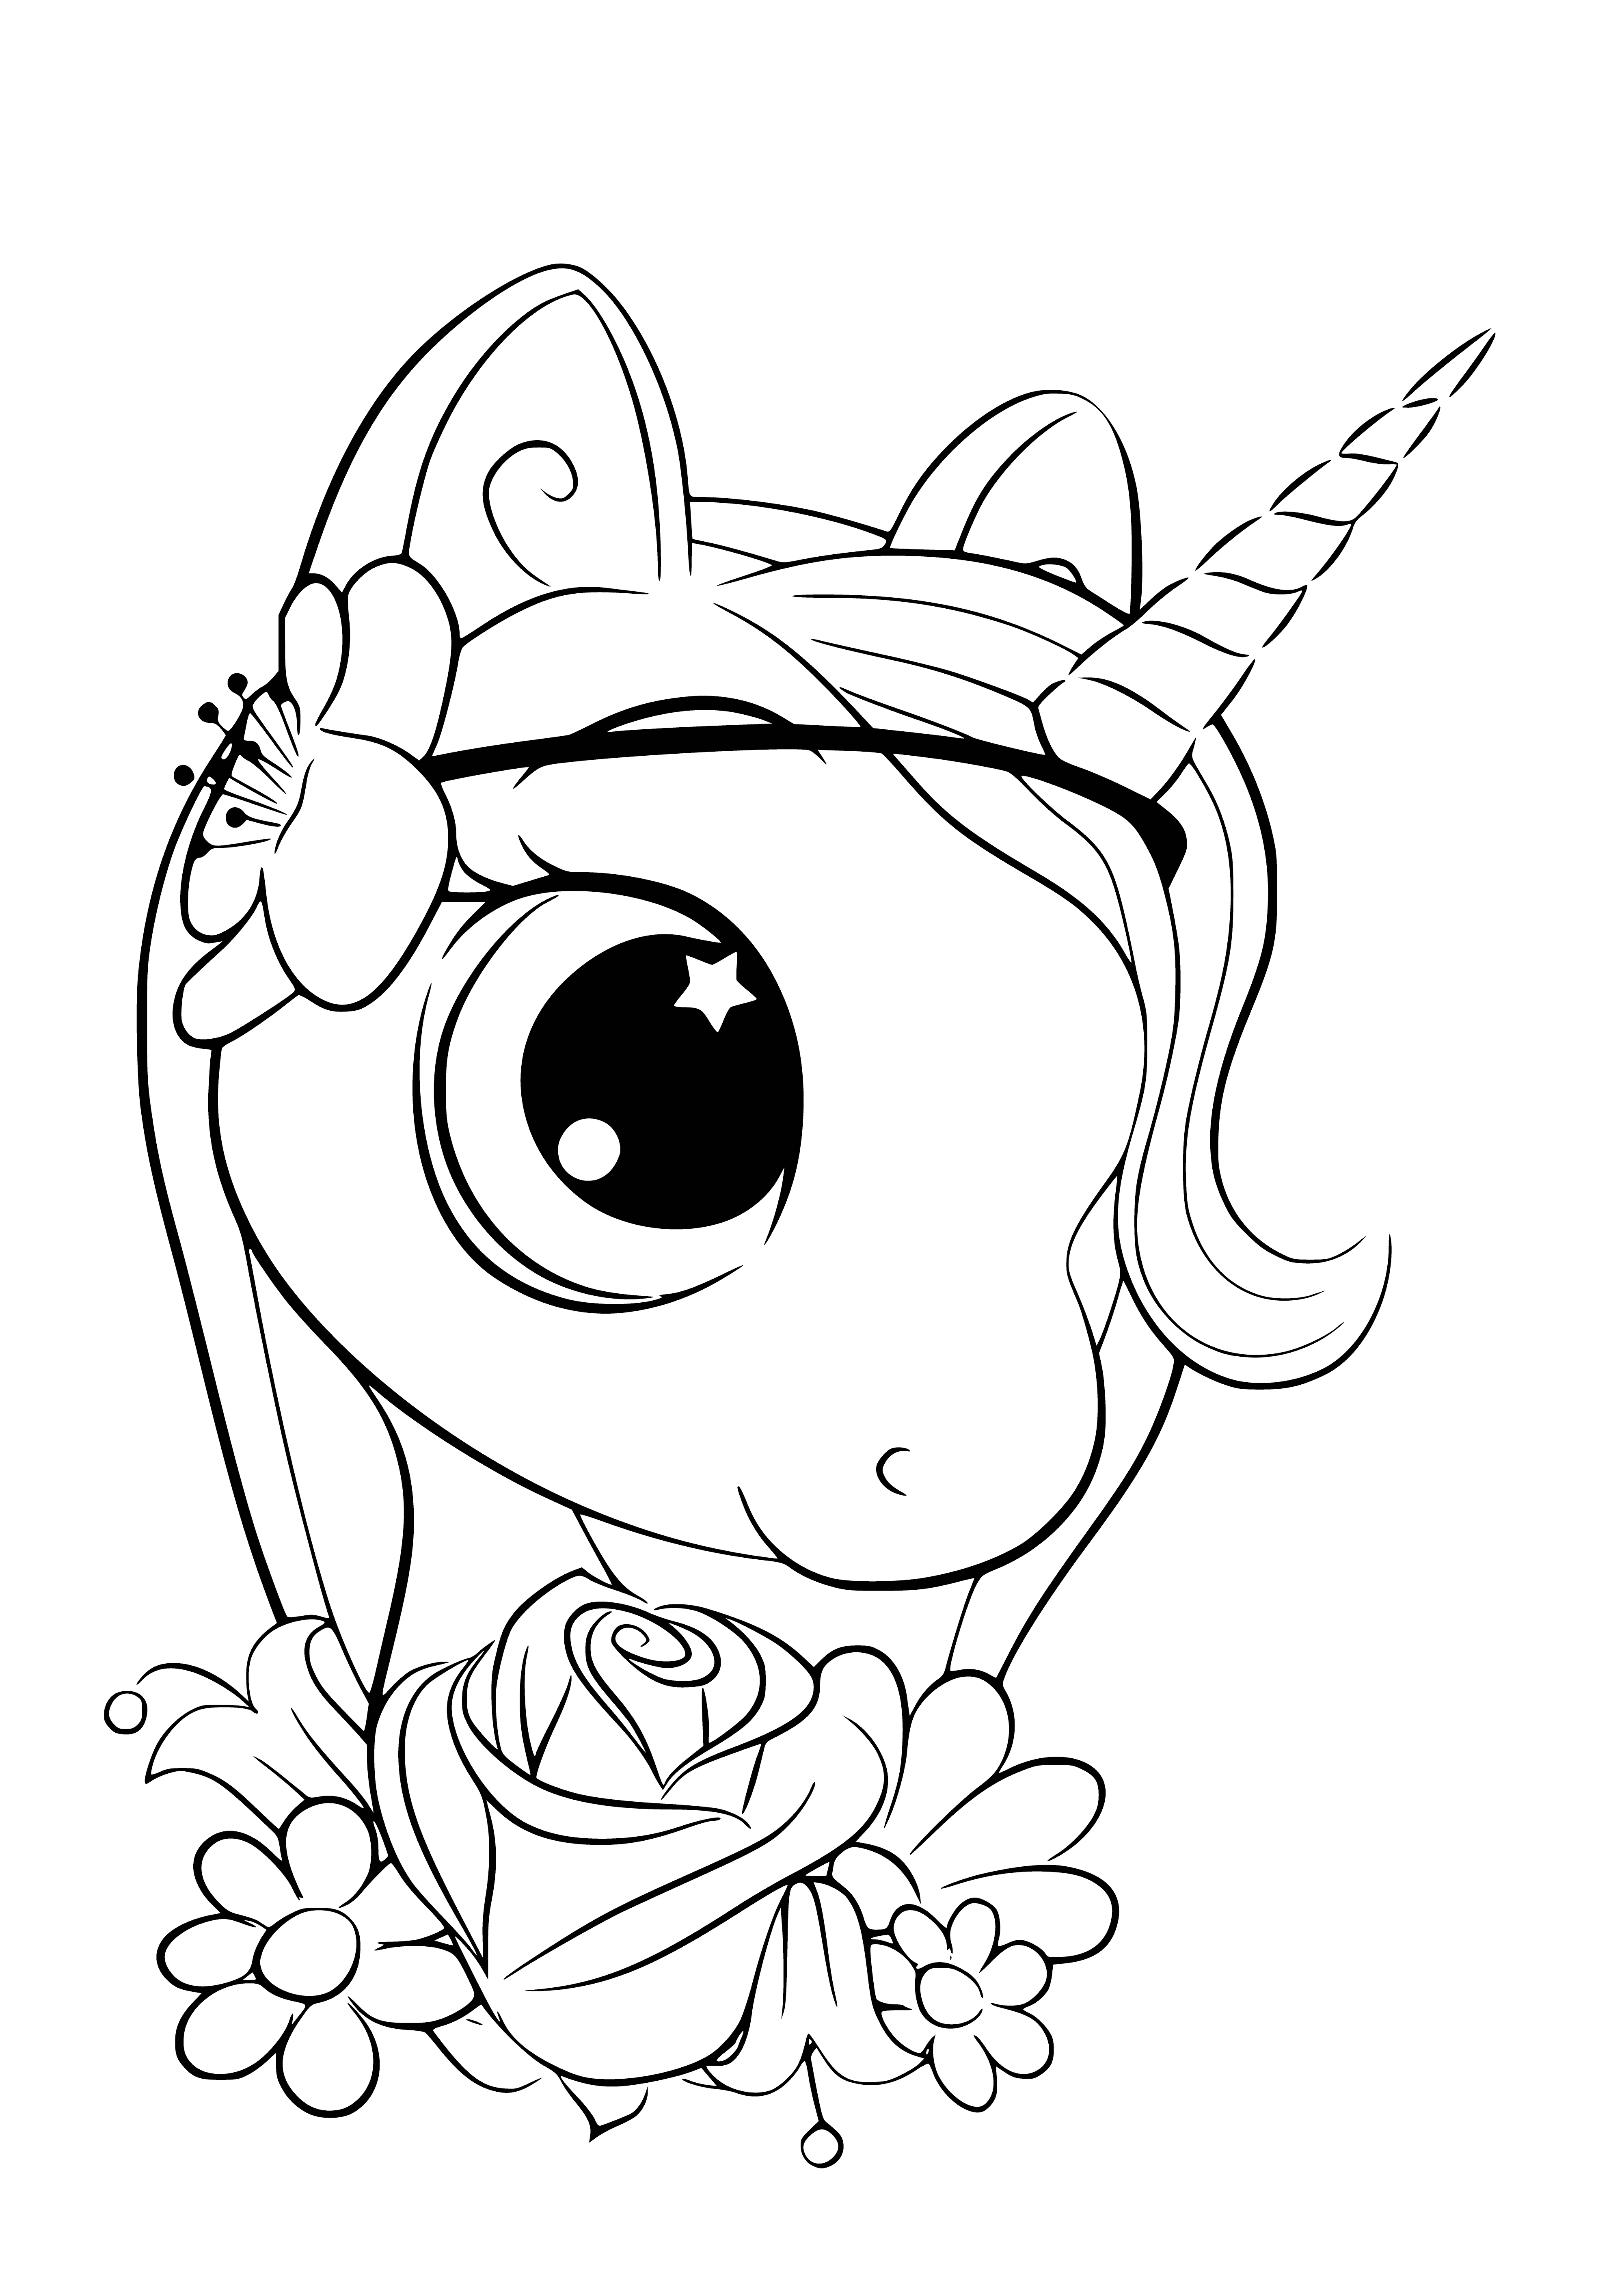 coloring page: A cute unicorn girl with a rainbow in the background smiles, wearing jewelry. #Kawaii #Coloring